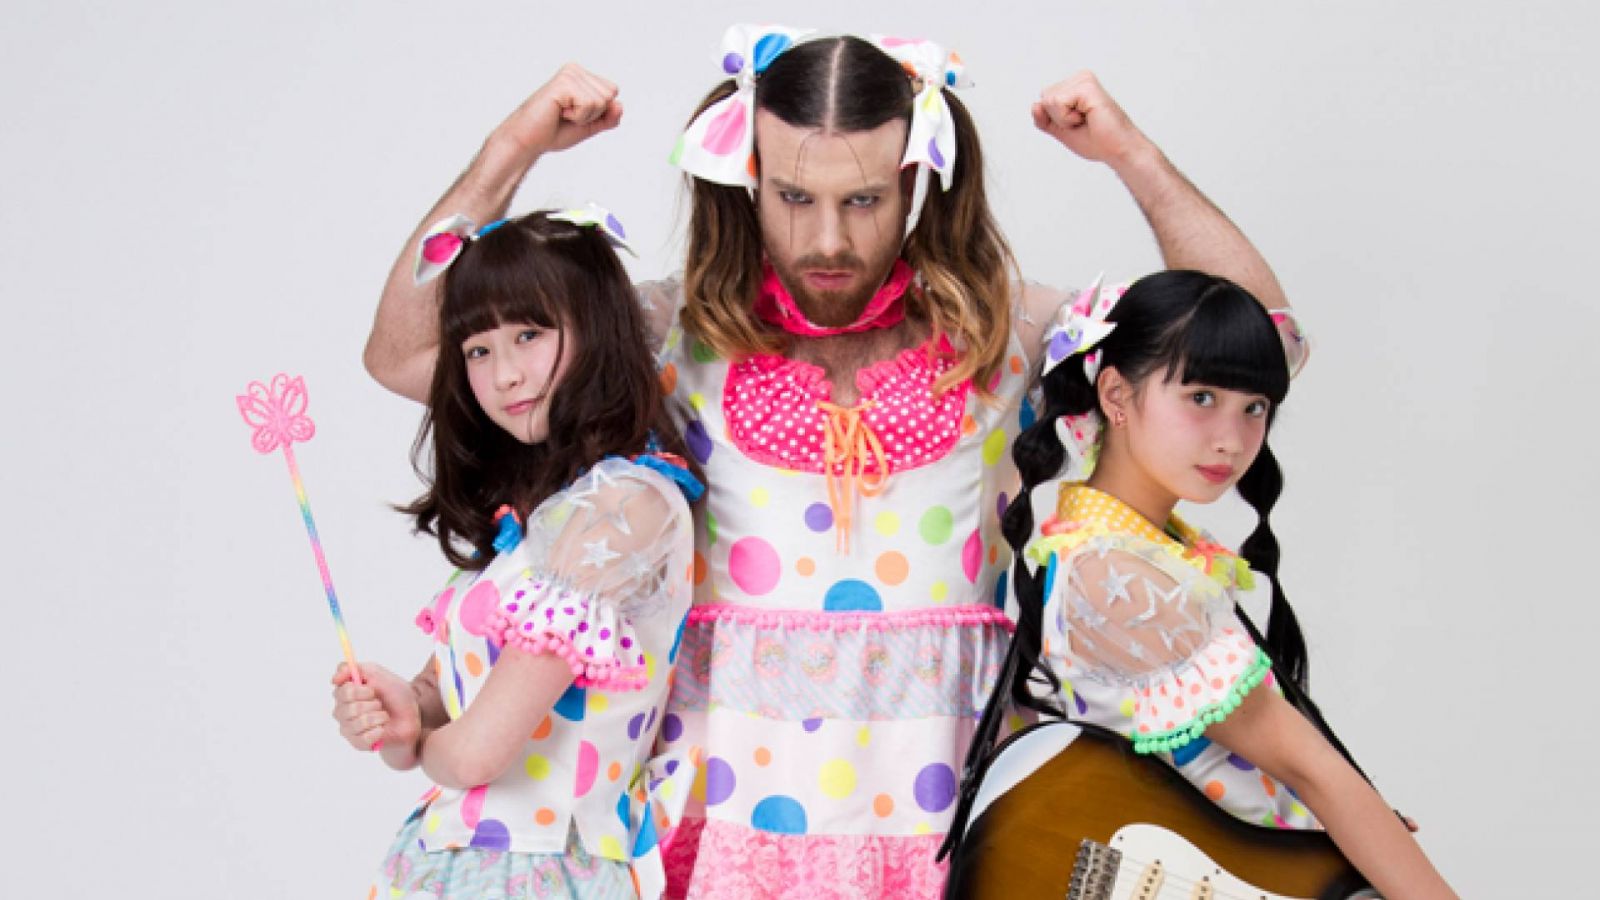 Interview avec LADYBABY © 2015 clearstone Co., Ltd. All rights reserved.